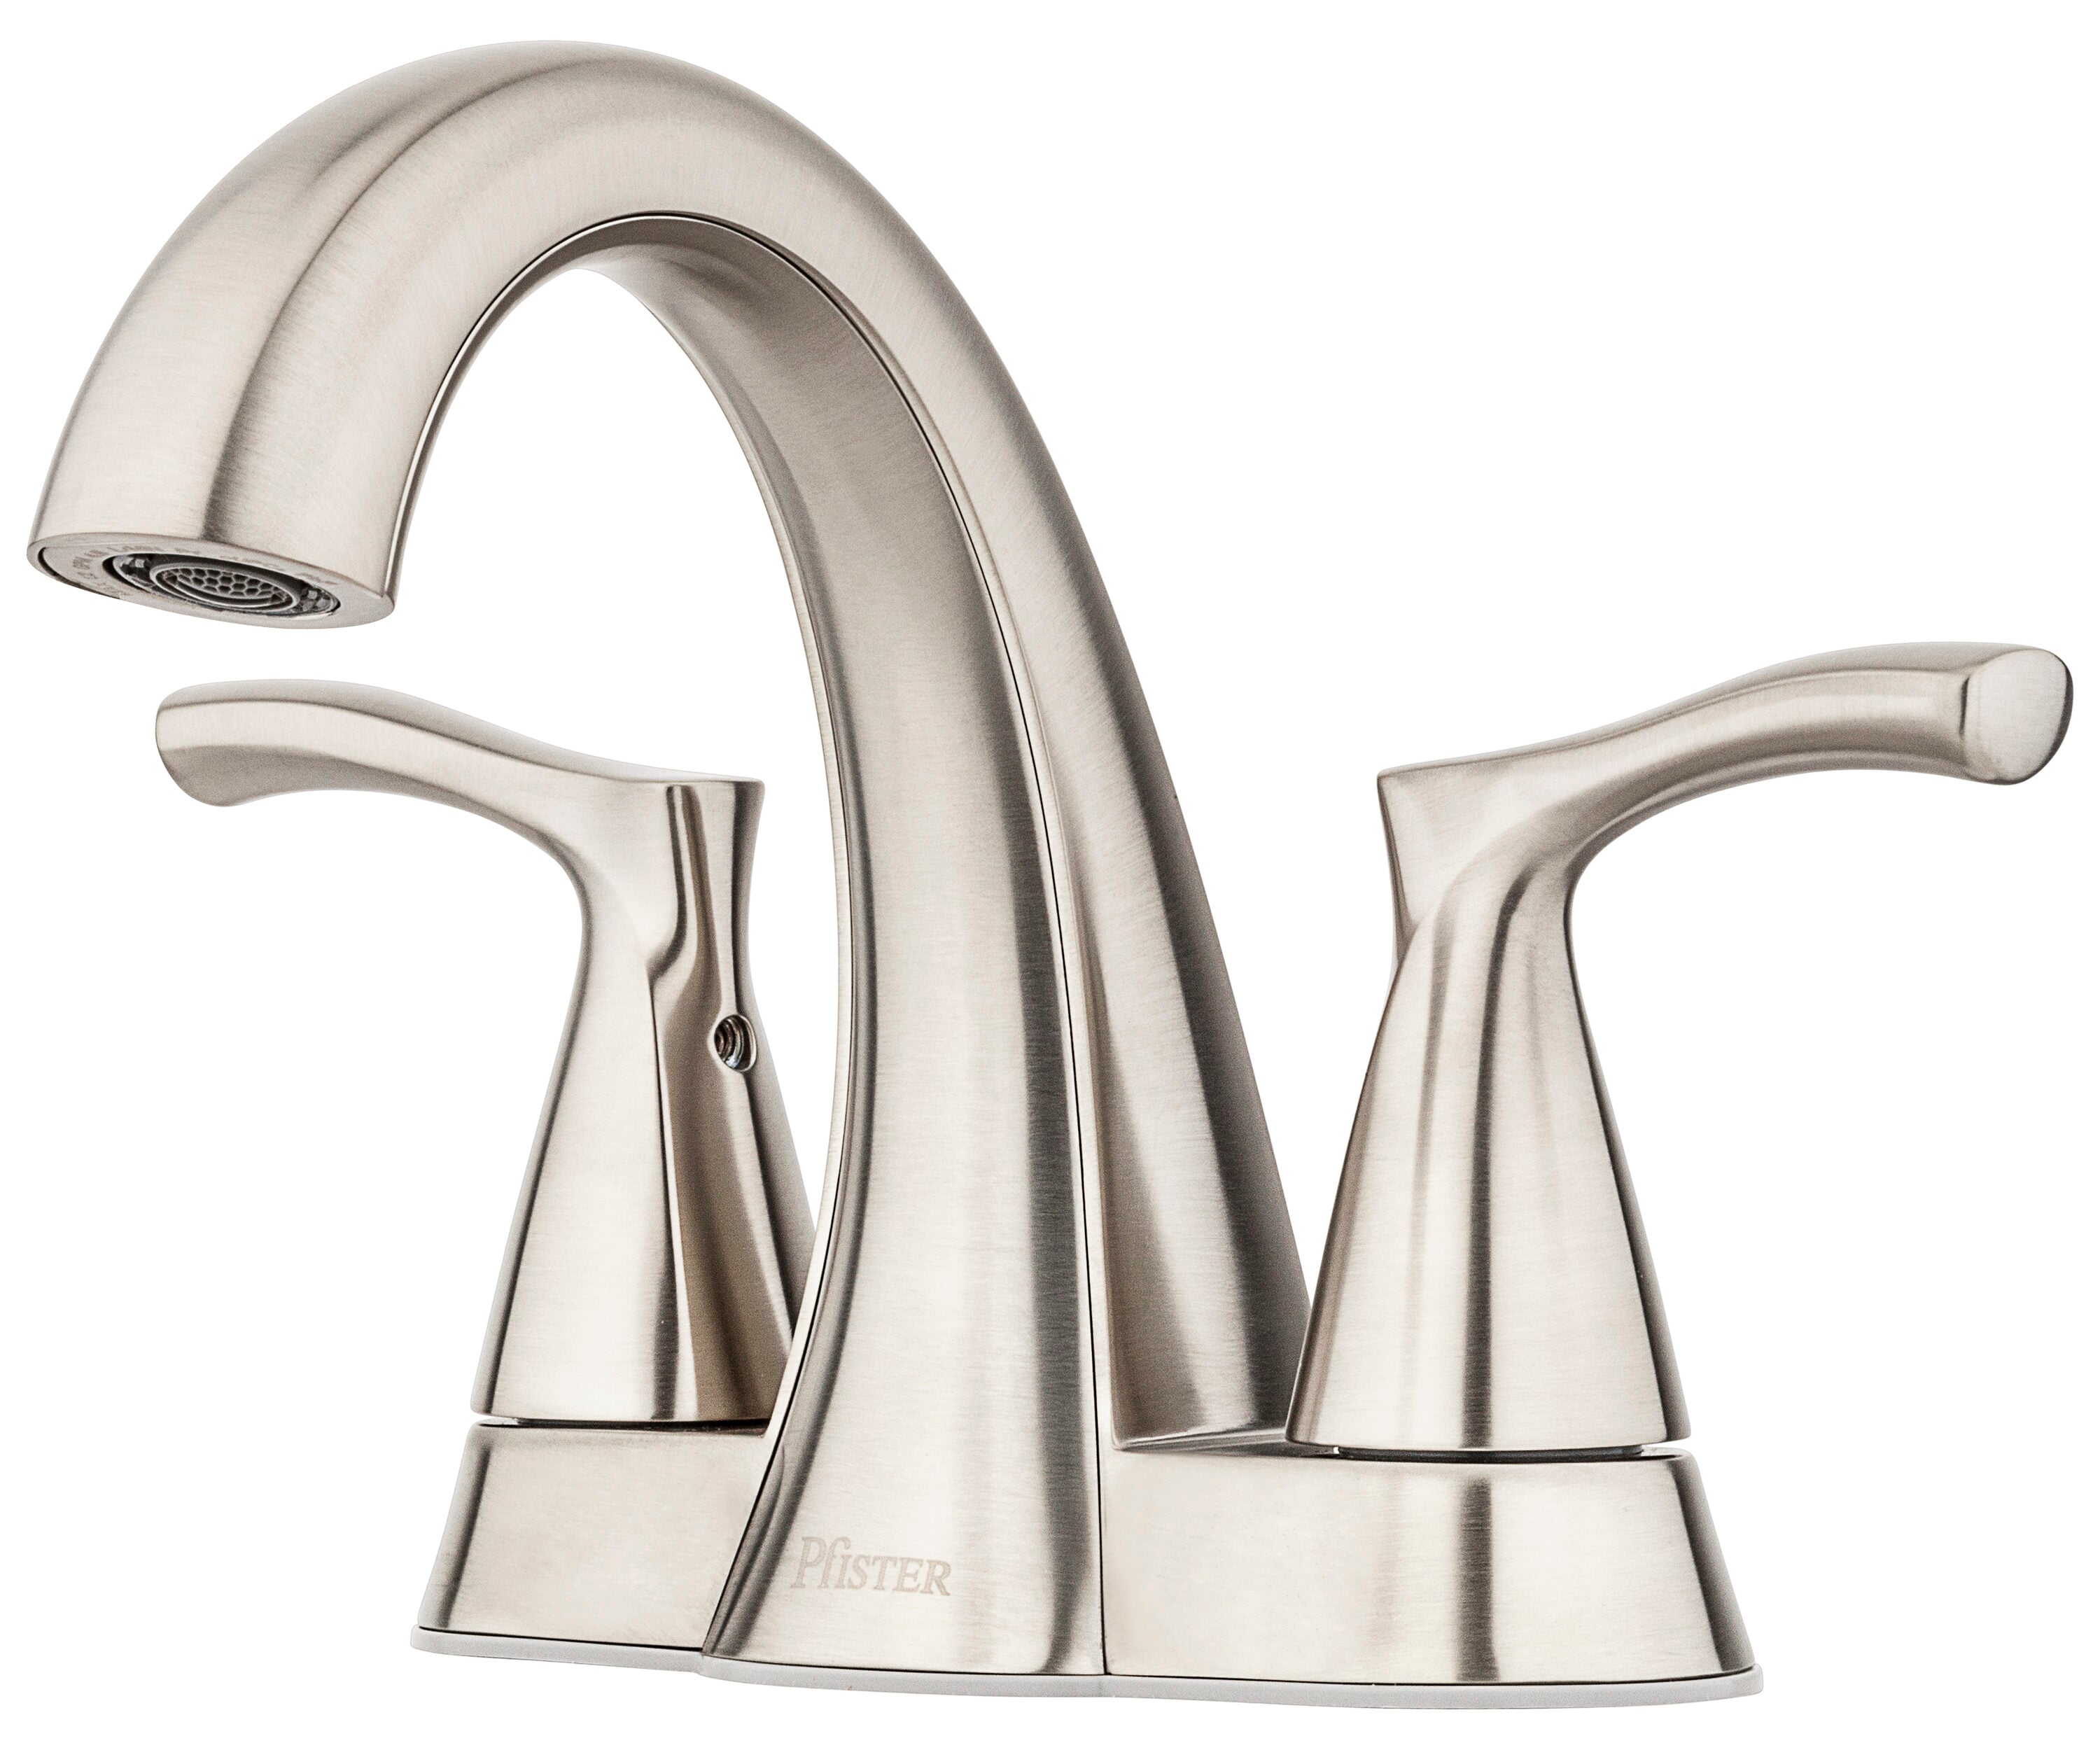 Two Handle Widespread Bathroom Faucet in Chrome 35847LF